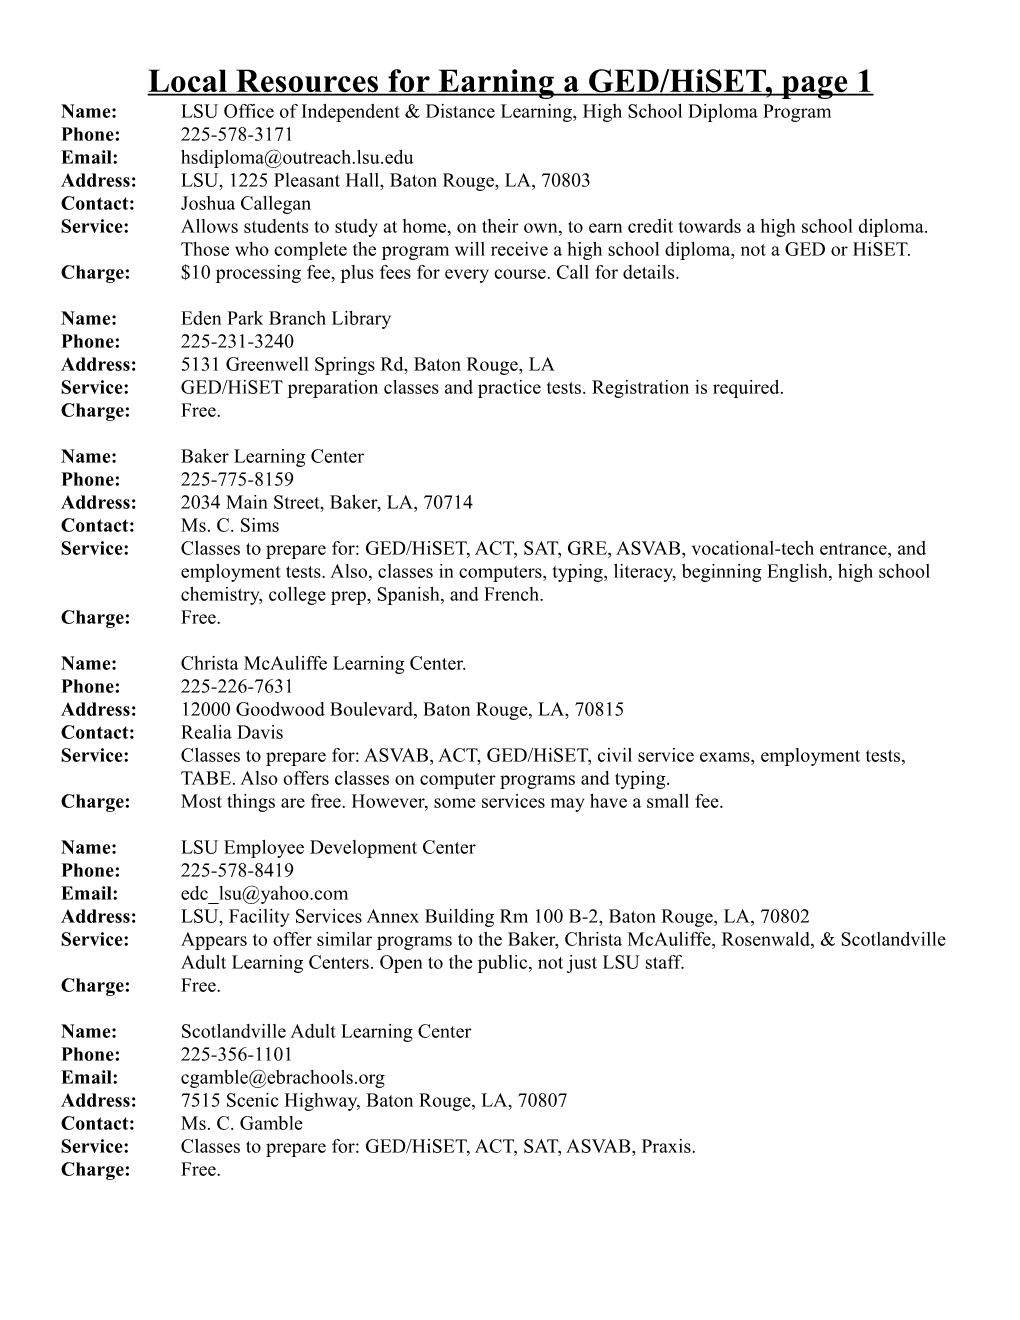 Local Resources for Earning a GED/Hiset, Page 1